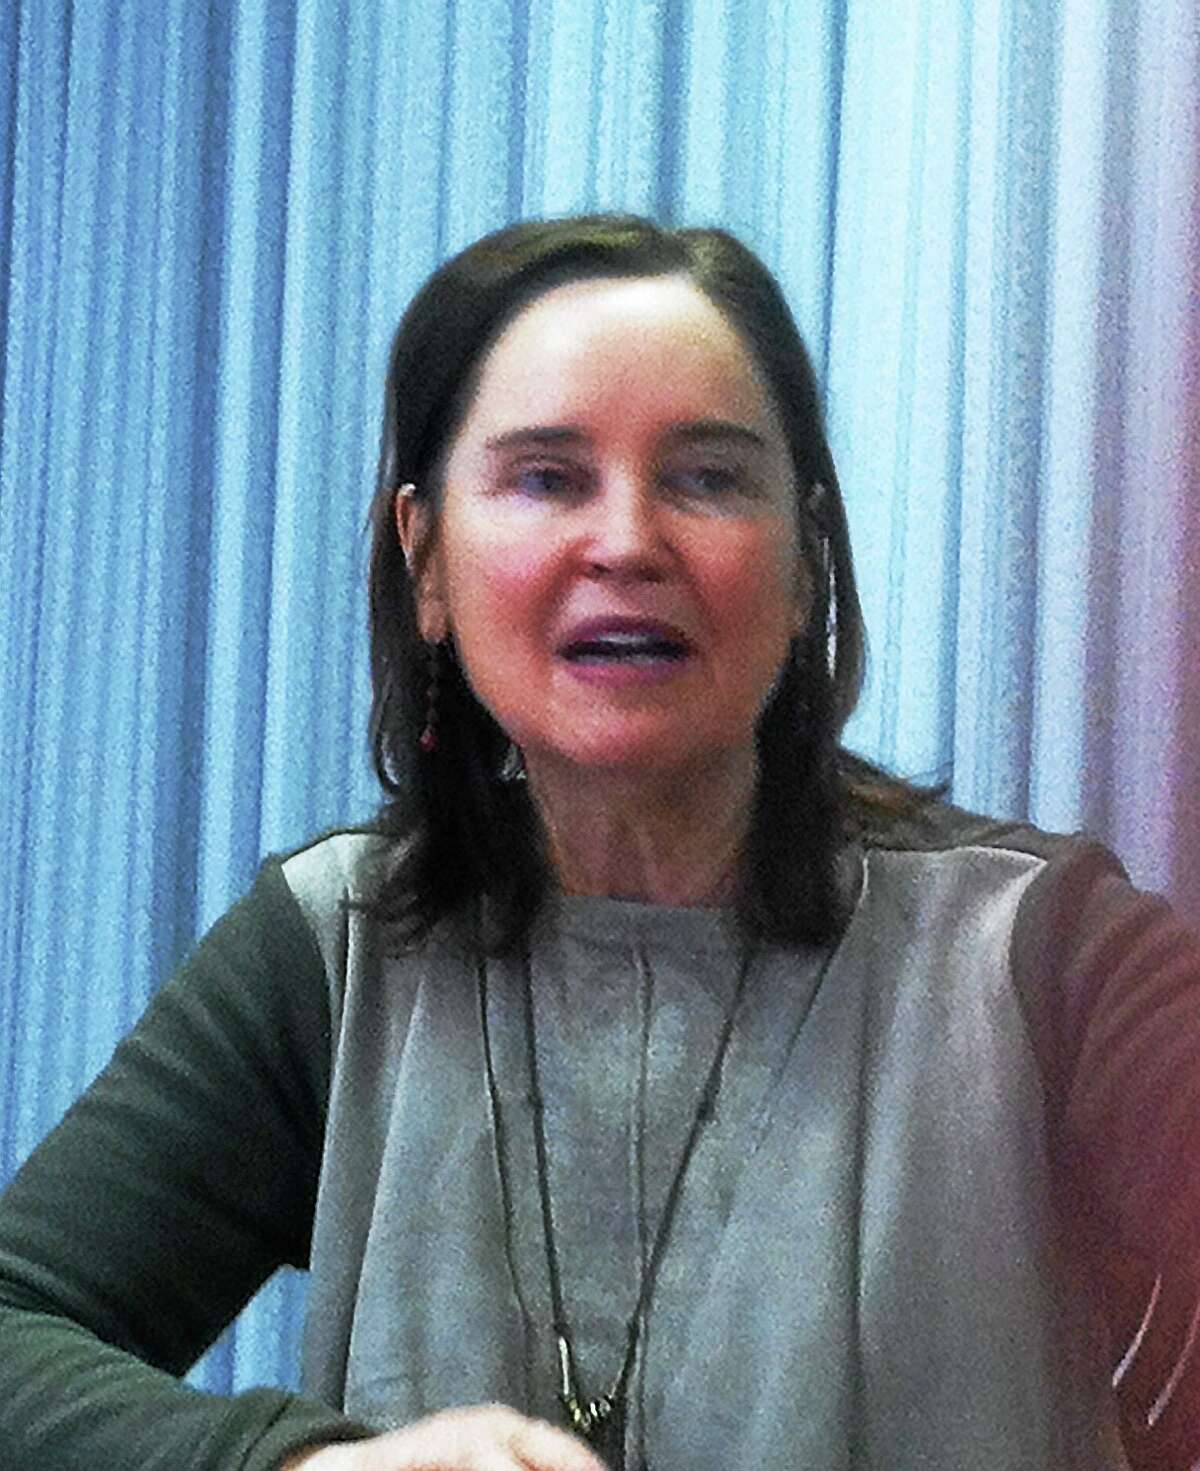 Connecticut Secretary of the State Denise Merrill